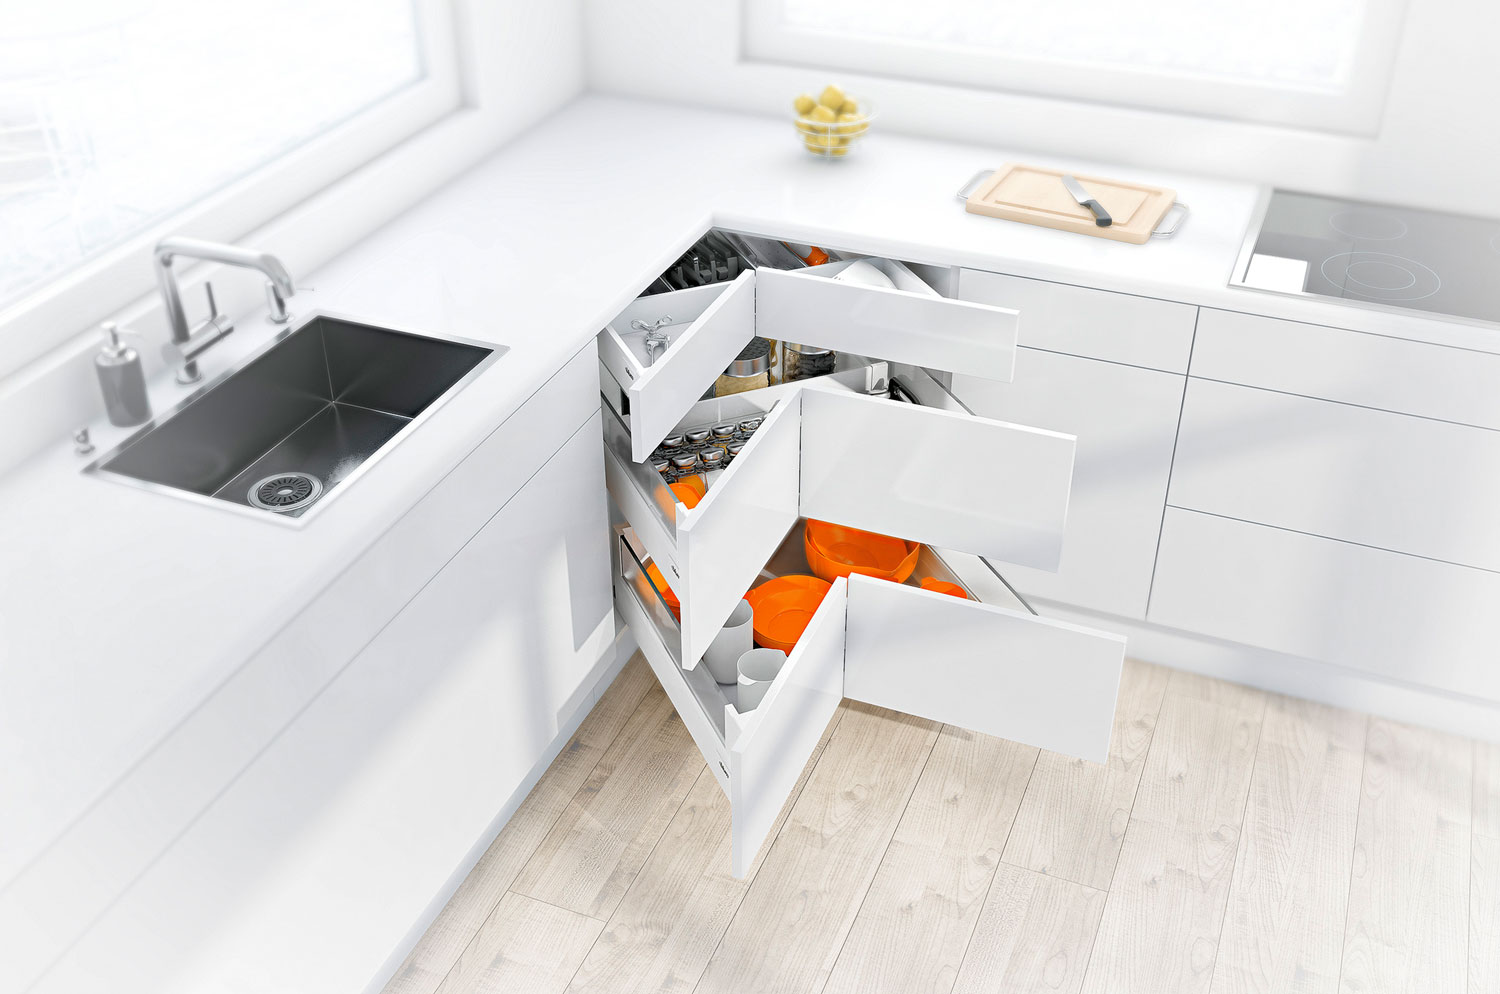 Featured image for “Functional Cabinet Design”